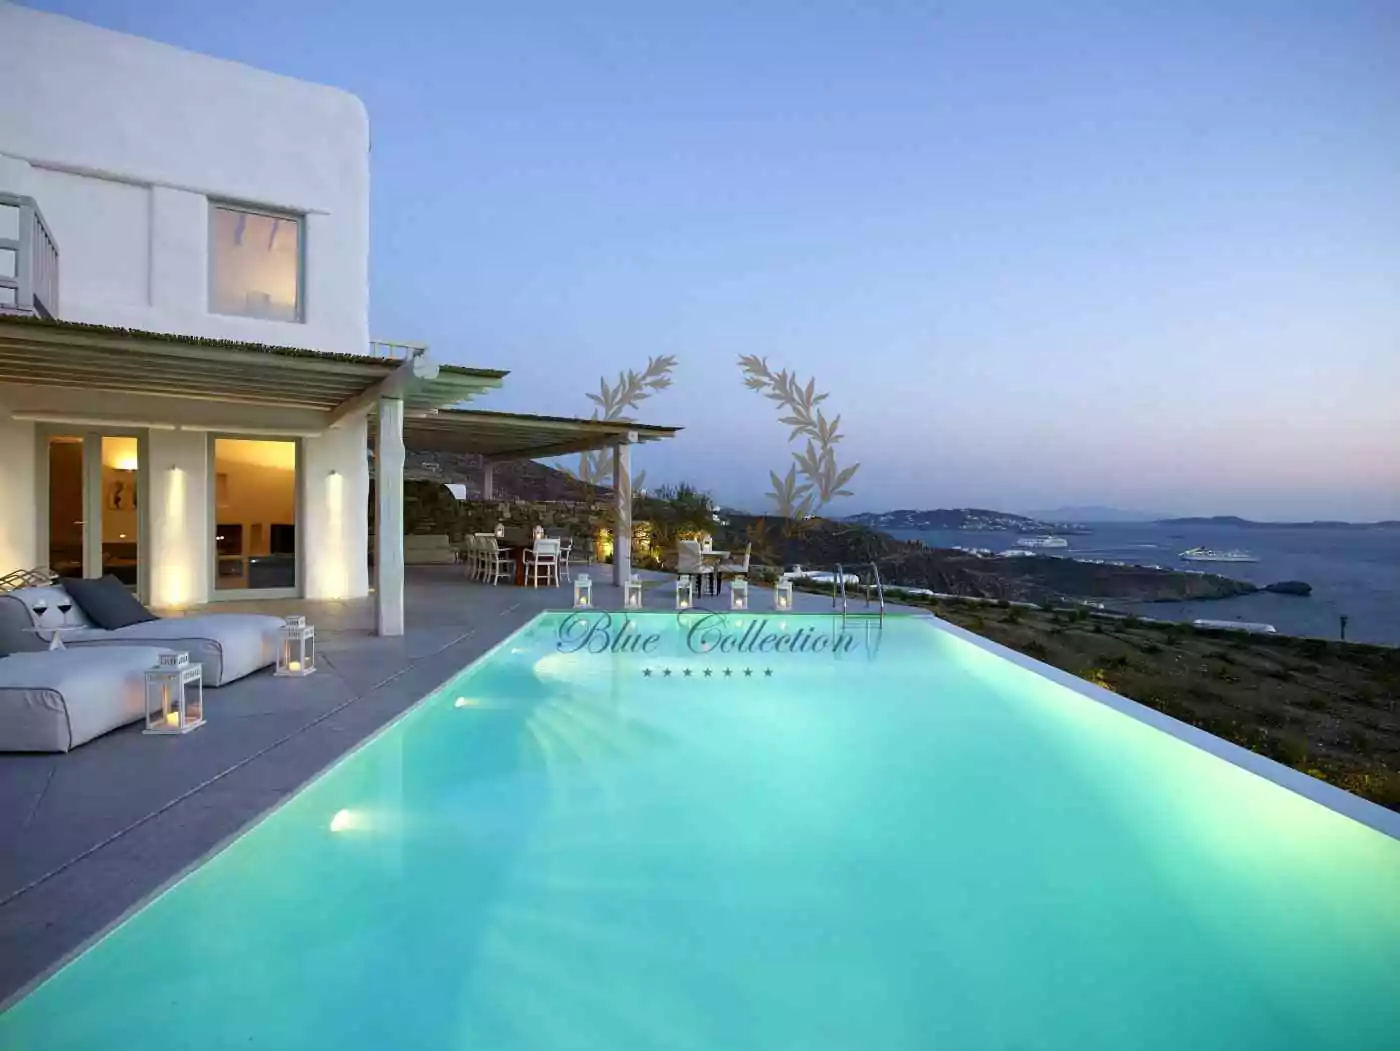 Mykonos | Choulakia – Private Villa with Pool & Stunning Views for Rent | Sleeps 8-10 | 4 Bedrooms | 5 Bathrooms | REF: 180412108 | CODE: CHA-1